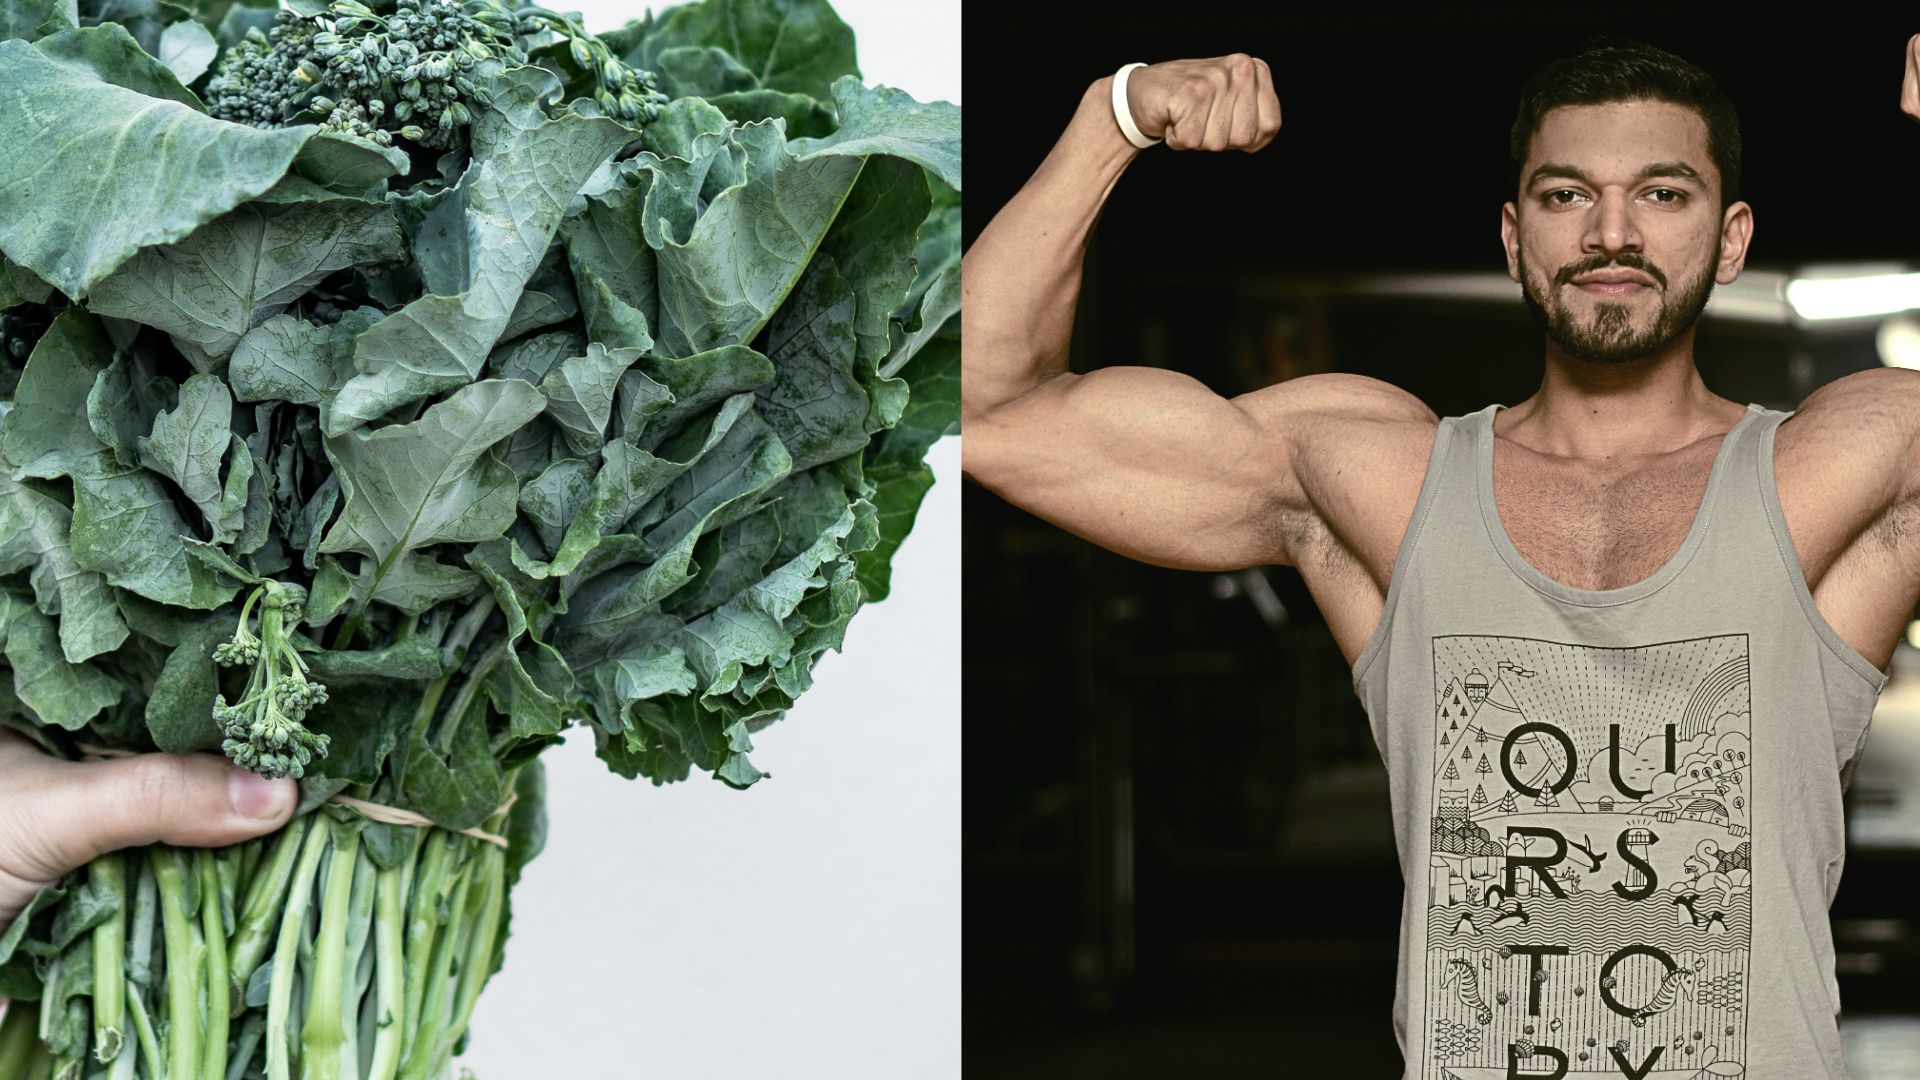 Can Kale And Squats Build Your Muscle?: Separating Fact from Fiction